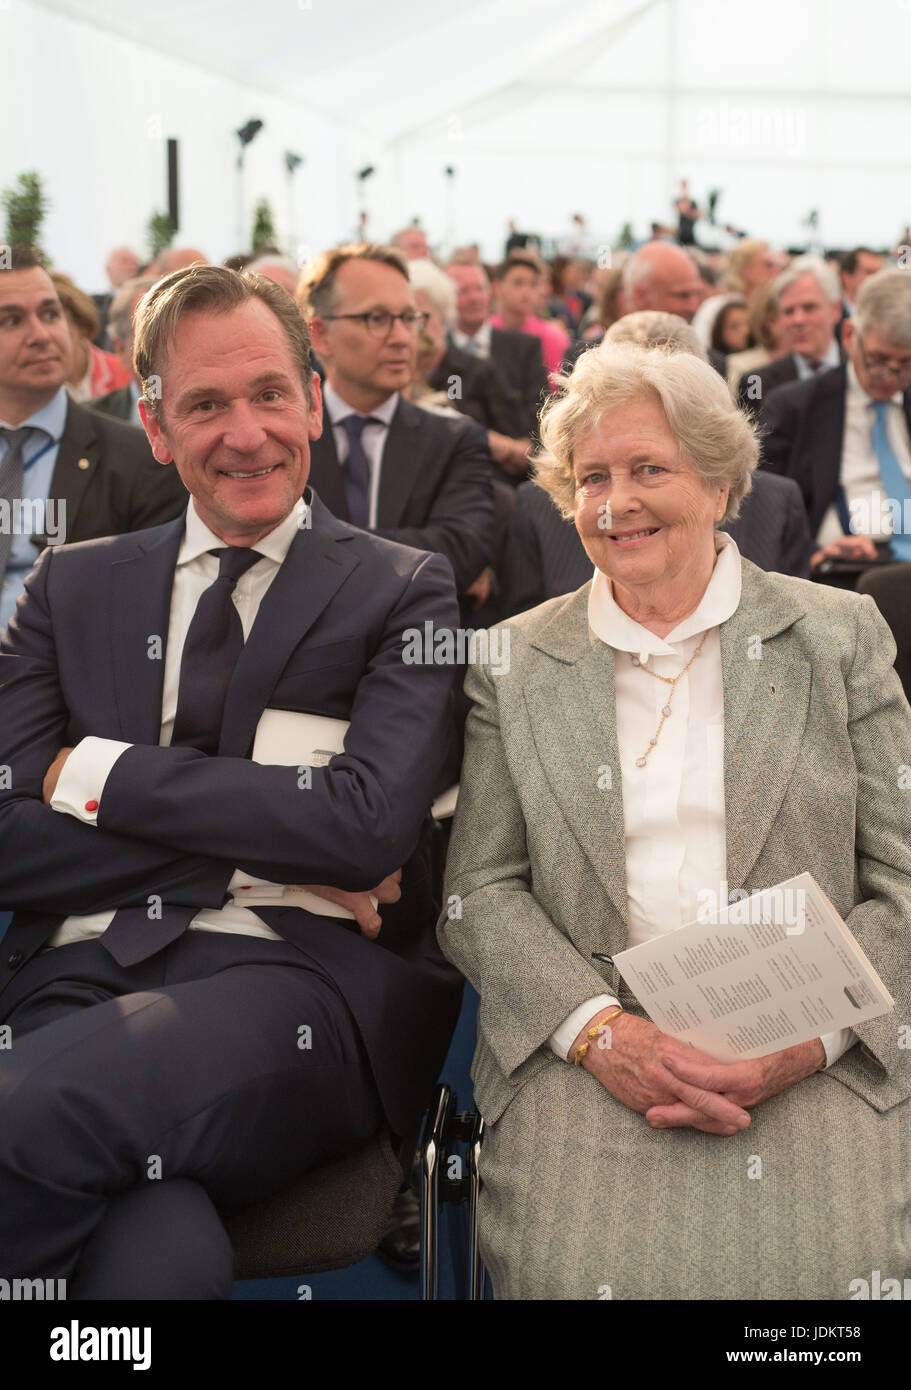 Berlin, Germany. 20th June, 2017. The Chairpeople of Axel Springer SE, Mathias Dopfner and Marianne von Weizsacker, arrive to the awards ceremony of the Henry A. Kissinger Prize in Berlin, Germany, 20 June 2017. Photo: Jörg Carstensen/dpa/Alamy Live News Stock Photo